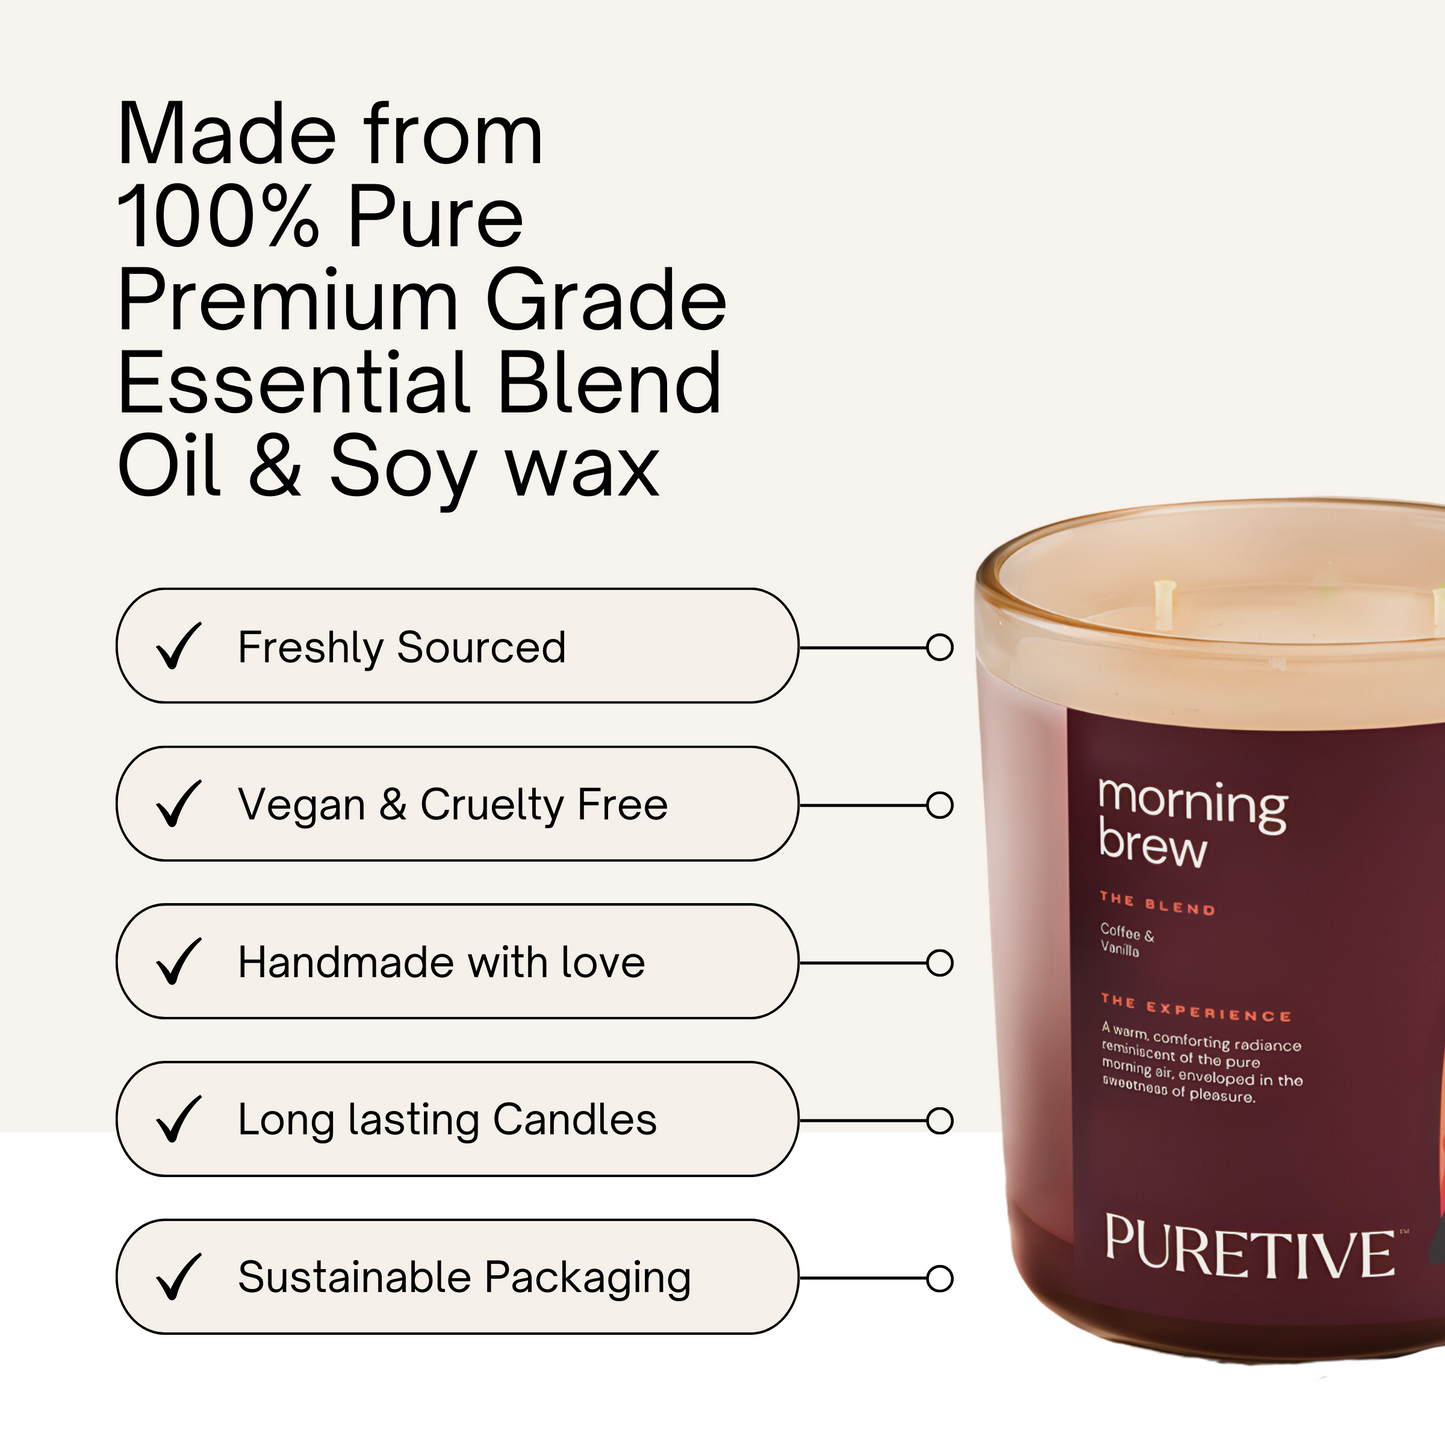 Picture of Puretive's Morning Brew Exotic Scented Candle's Key Features such as "Freshly Sourced", "Vegan & Cruelty Free" , "Handmade With Love", "Long Lasting candles" & "Sustainable Packaging"